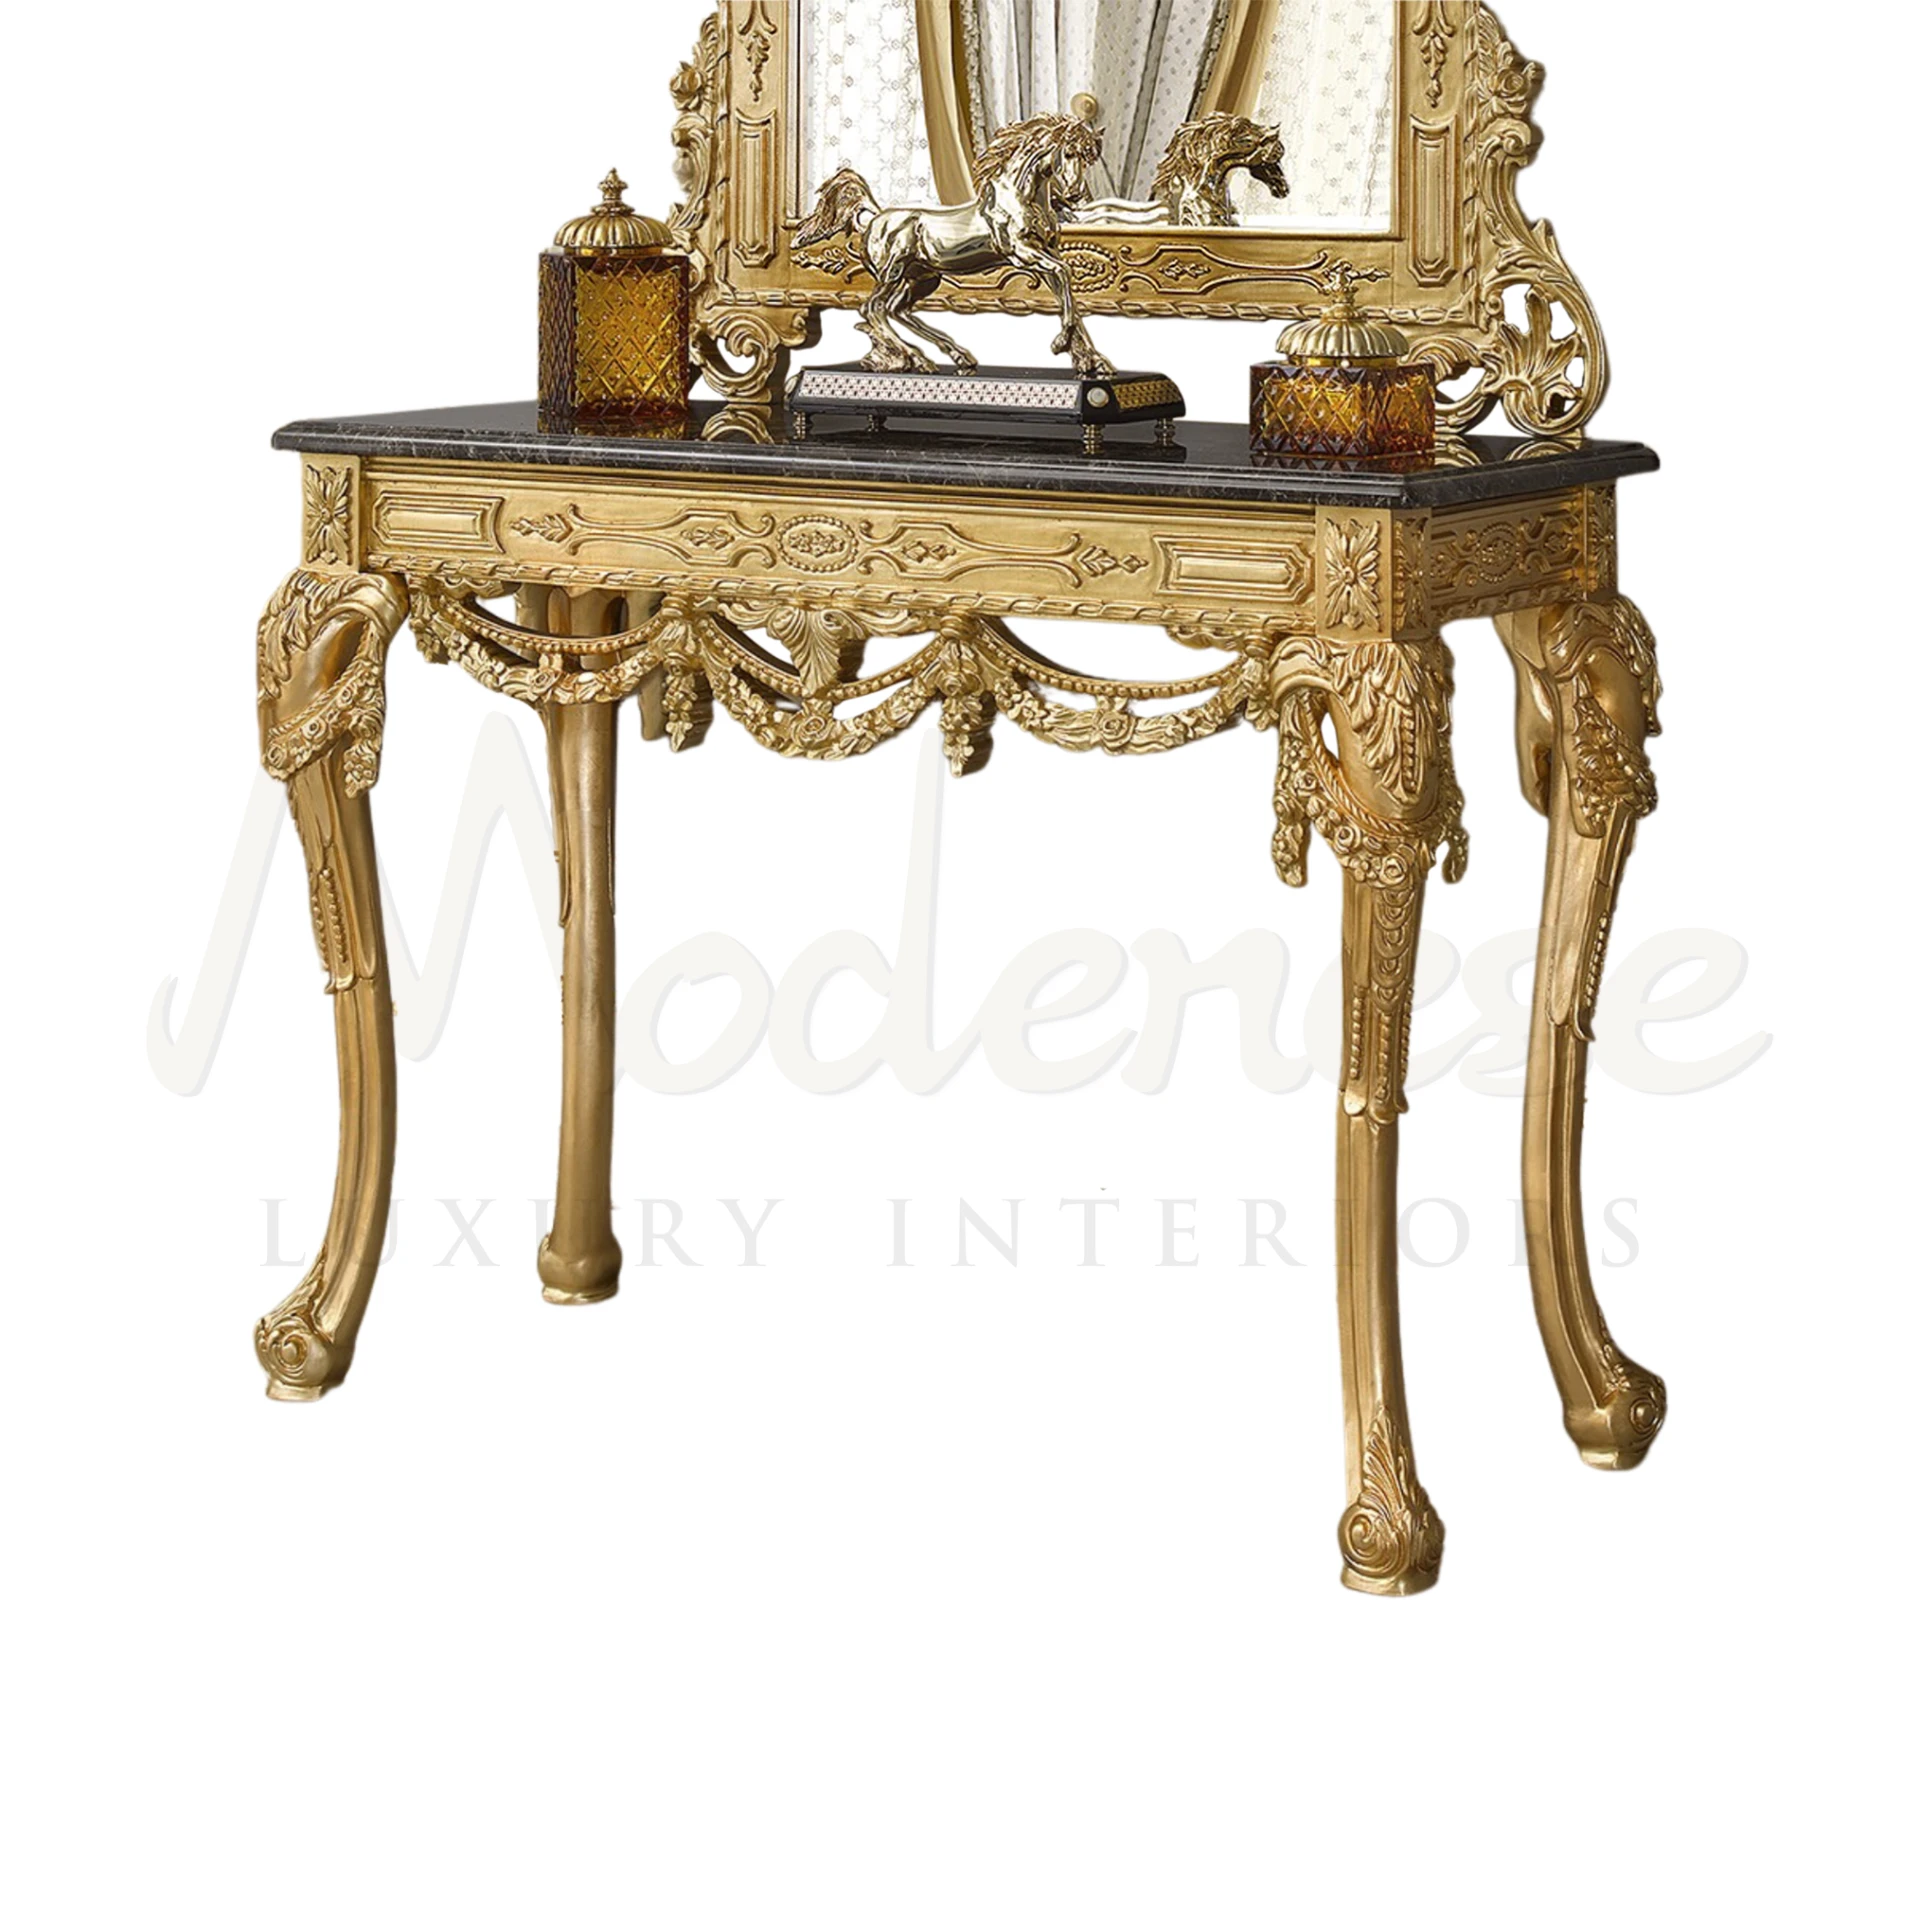 Luxurious Emperador Dark Console by Modenese Furniture, featuring solid wood craftsmanship and exquisite marble top.